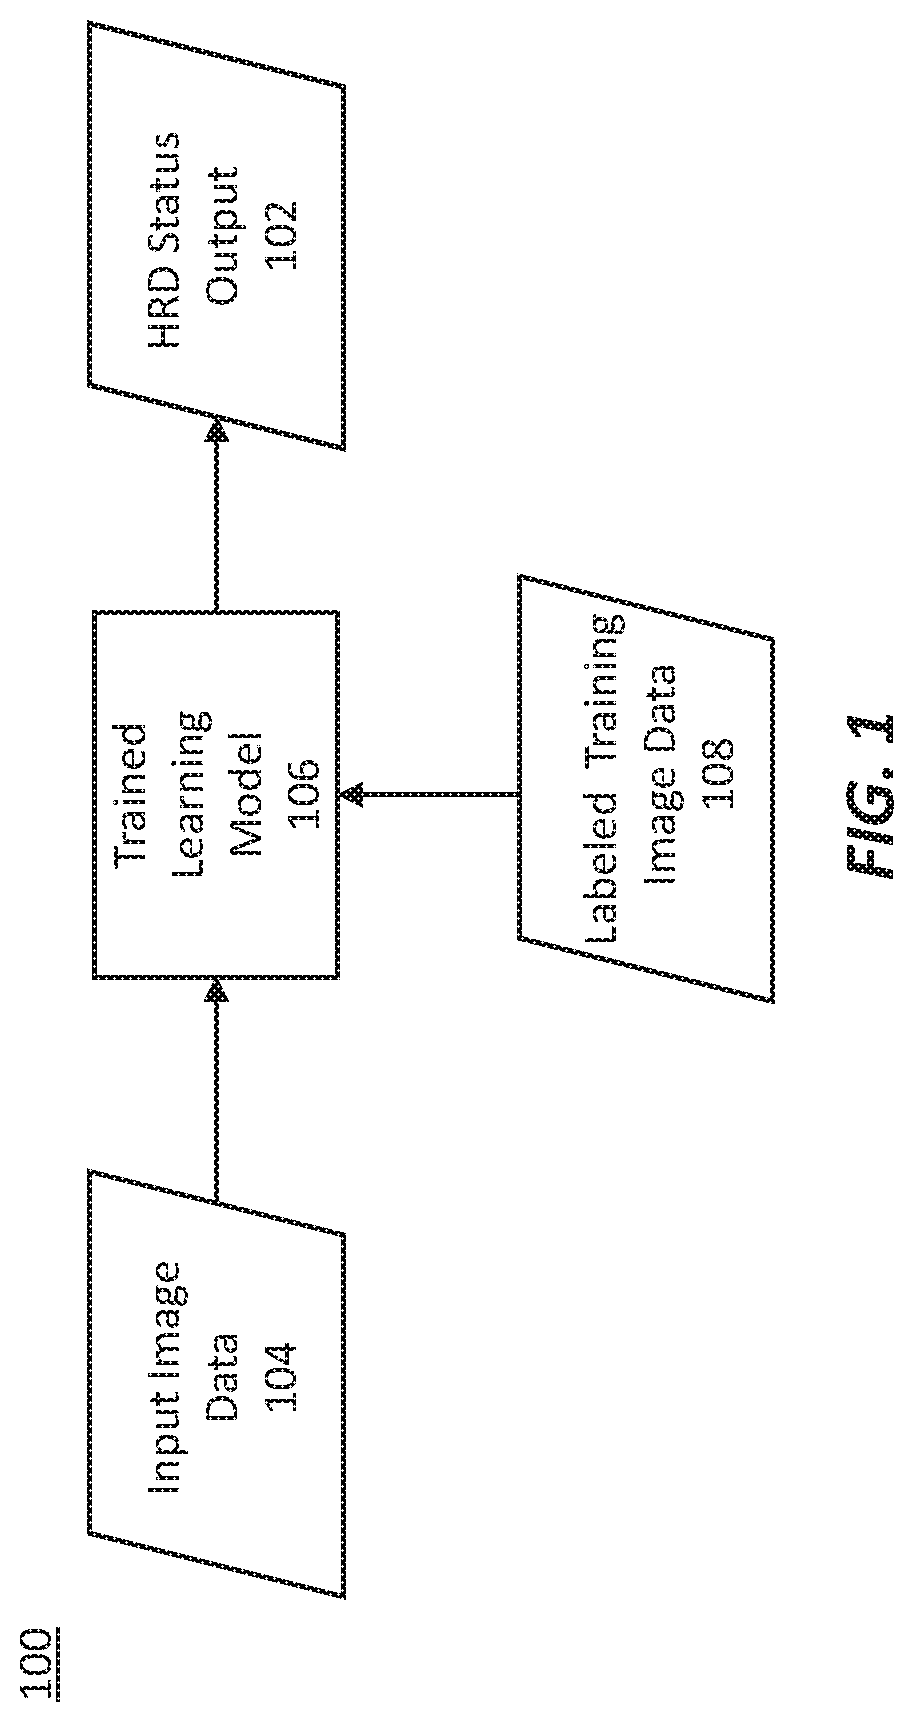 Methods for characterizing and treating a cancer type using cancer images